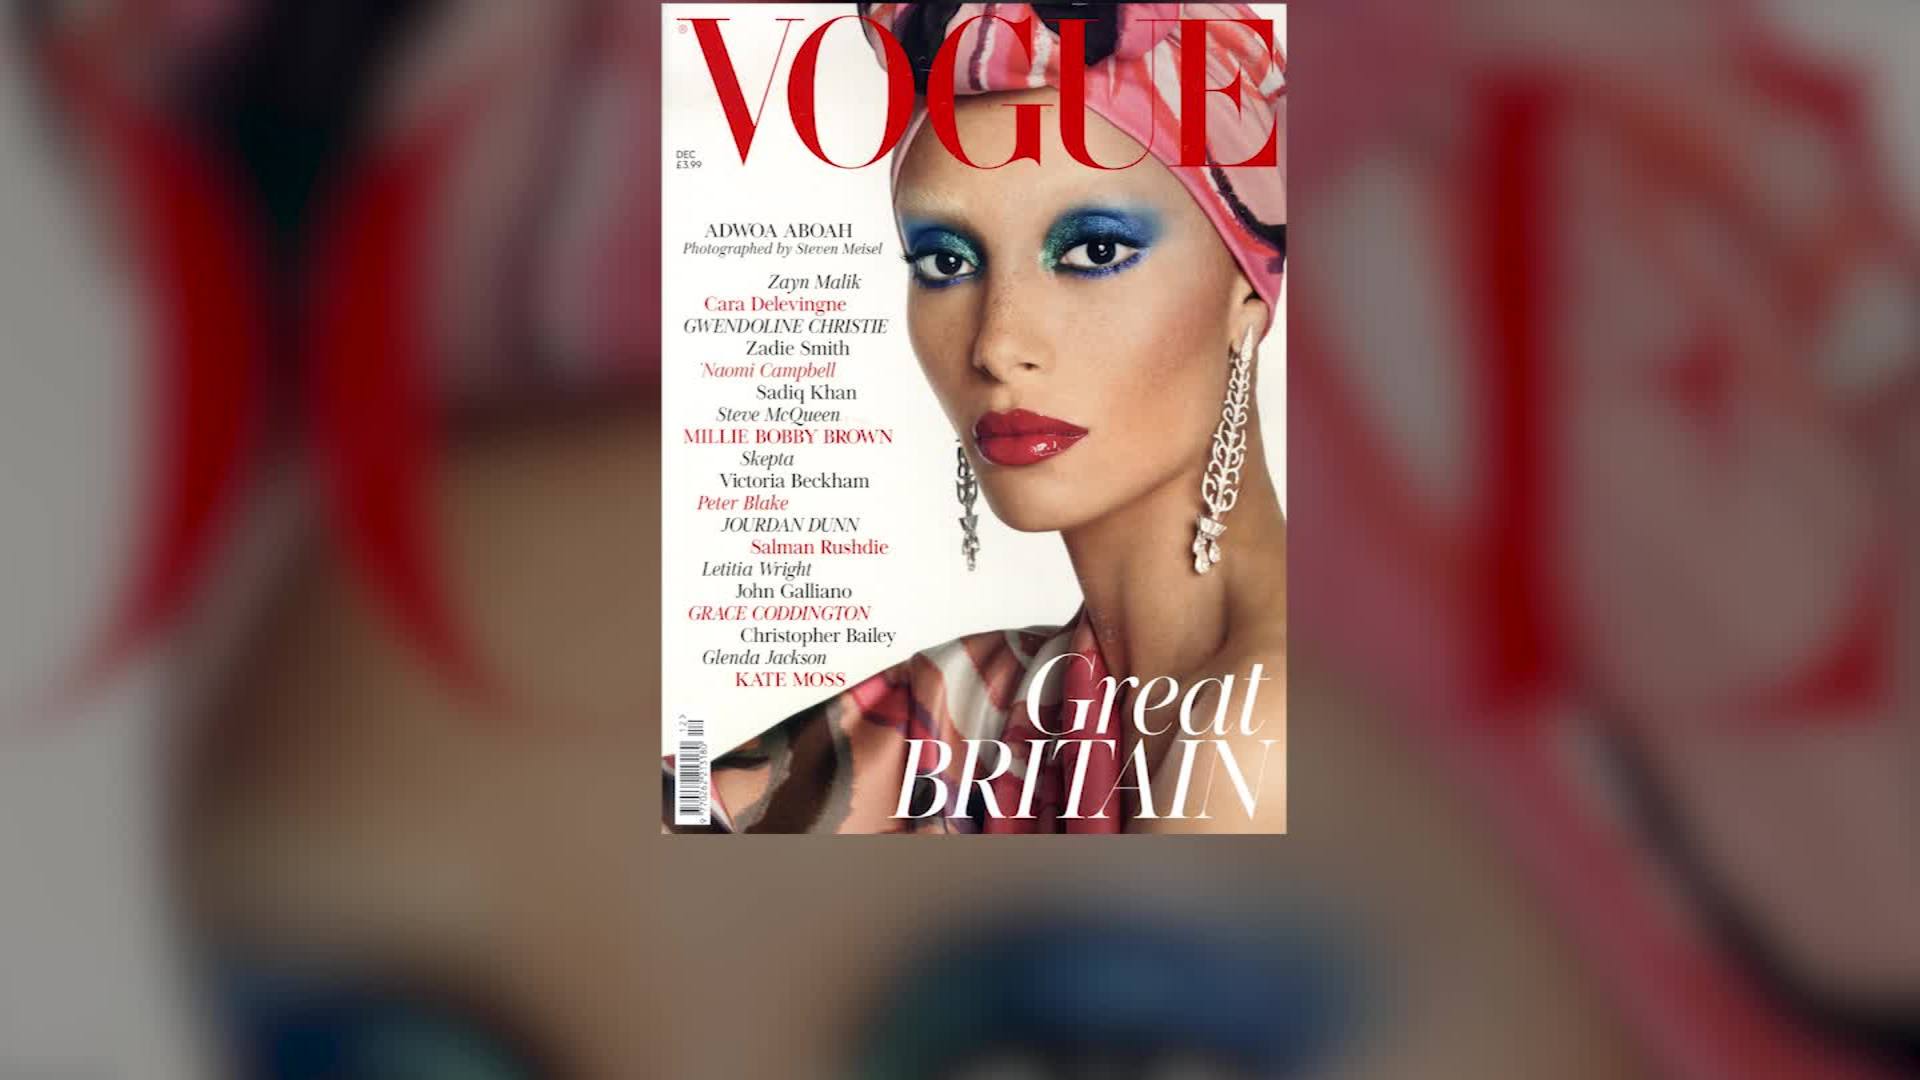 Vogue's new cover star signals new era for diveristy